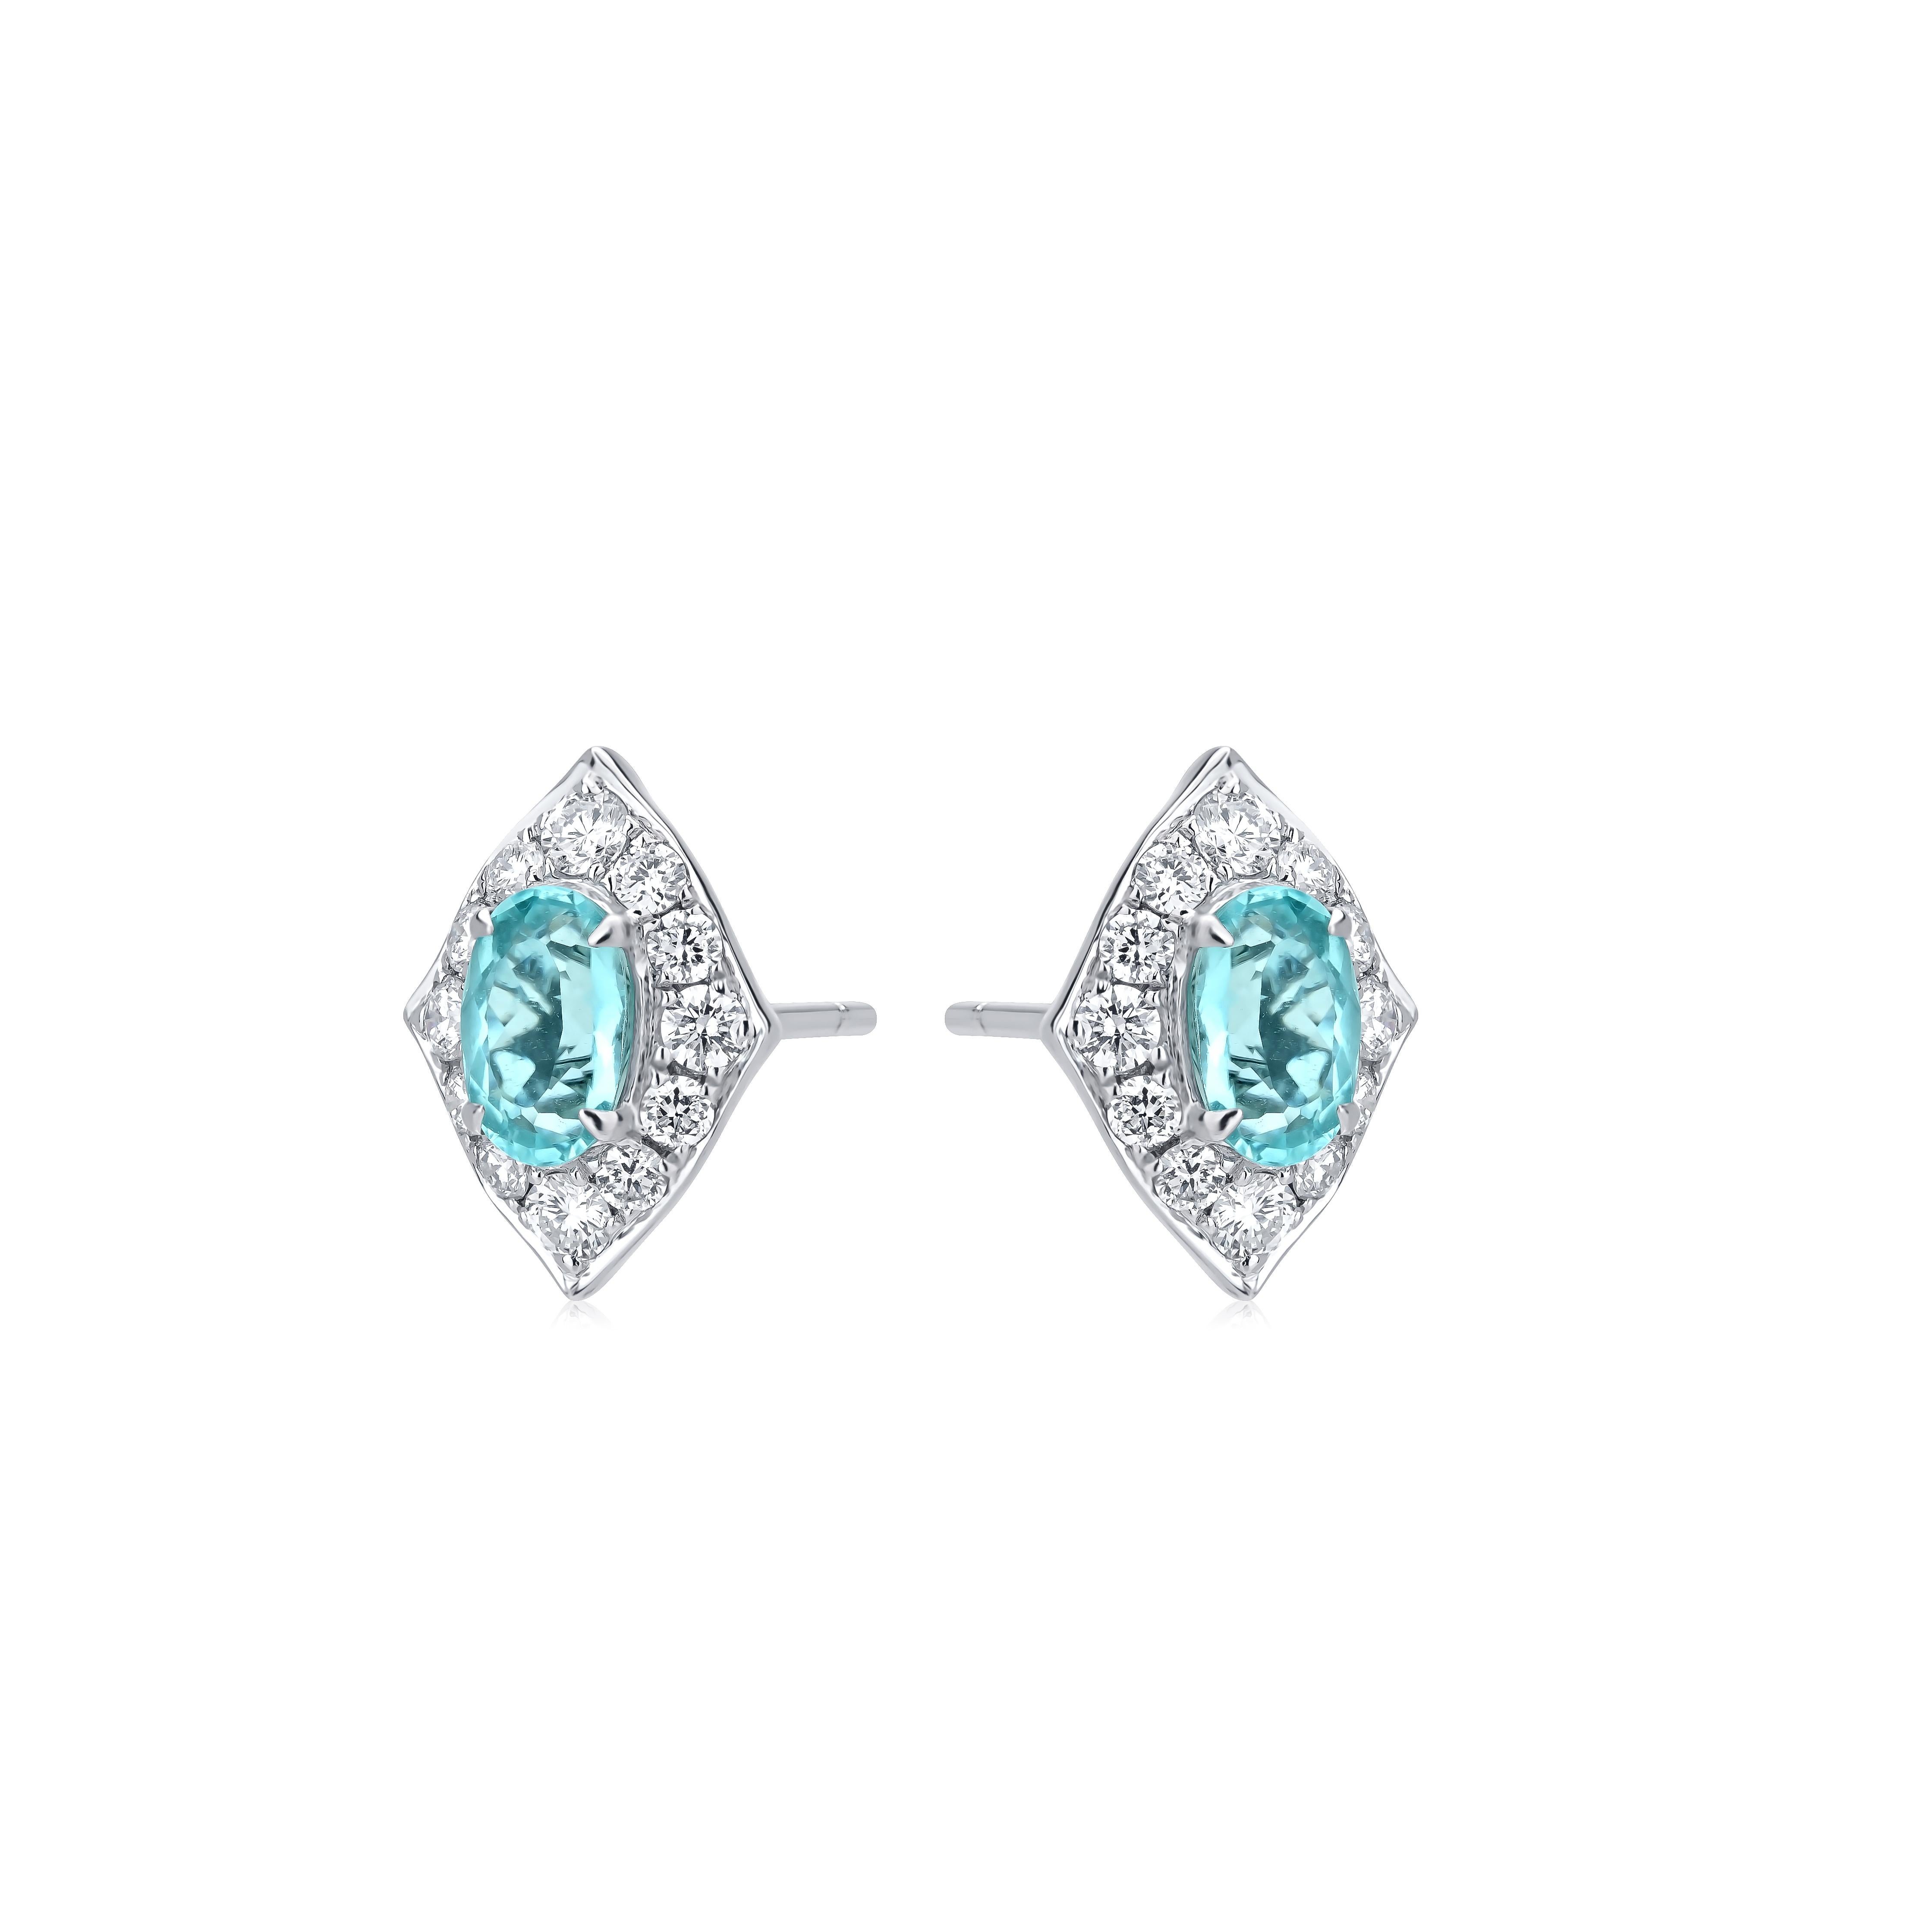 The 1.25 carat Paraiba and 0.66 carat diamond earrings are designed by Nigaam in 18 karat white gold. The diamond-shaped earring is studded with round-cut diamonds. It has a rare design with a Paraiba that has an eye-catching shine. G-H color grade